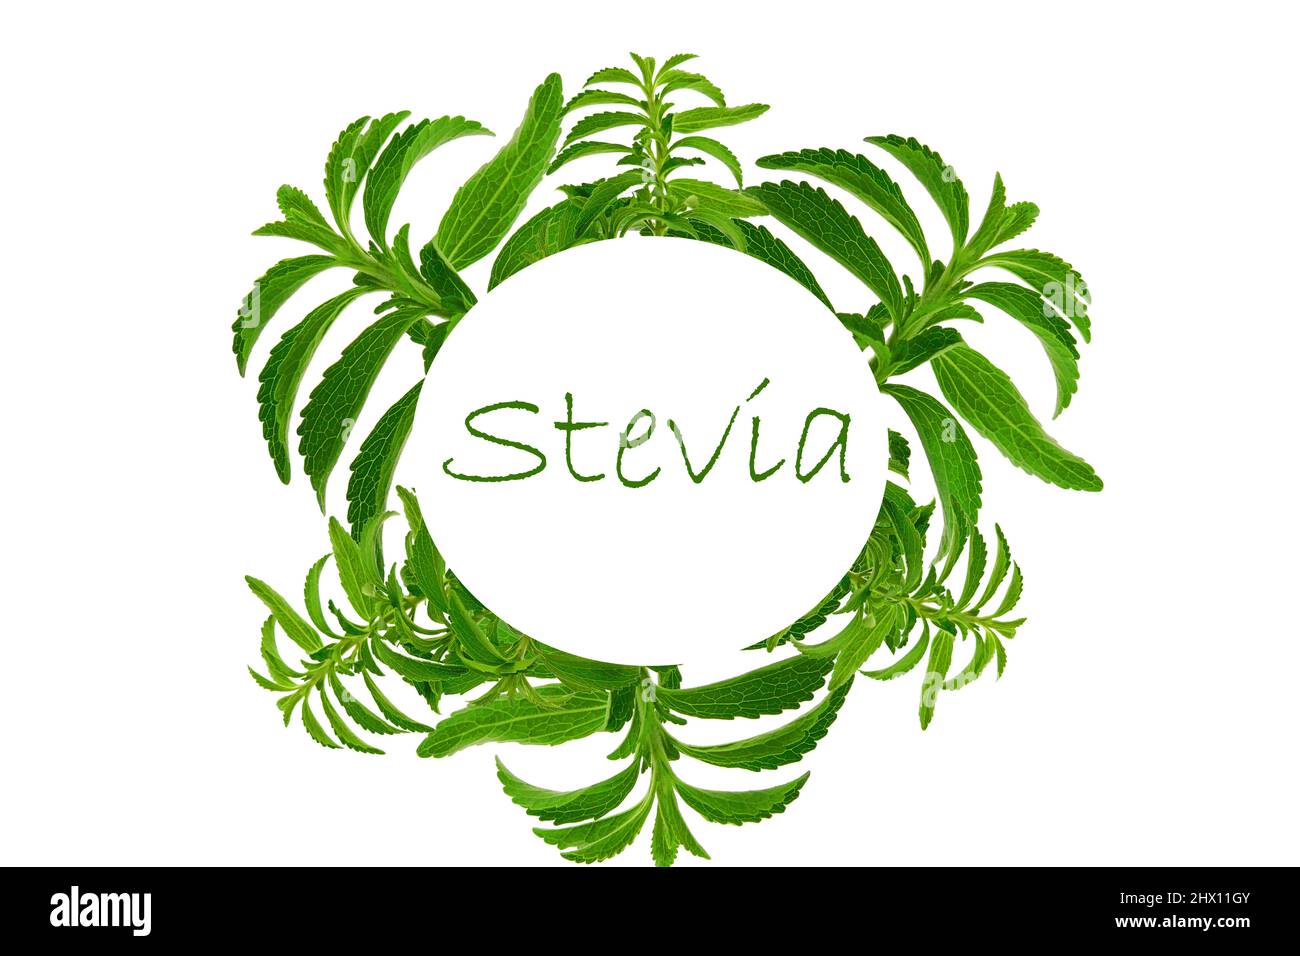 Stevia frame. Green twig and the inscription stevia isolated on white background.Stevia plant. natural low calorie sweetener.Stevioside Sweetener Raw Stock Photo